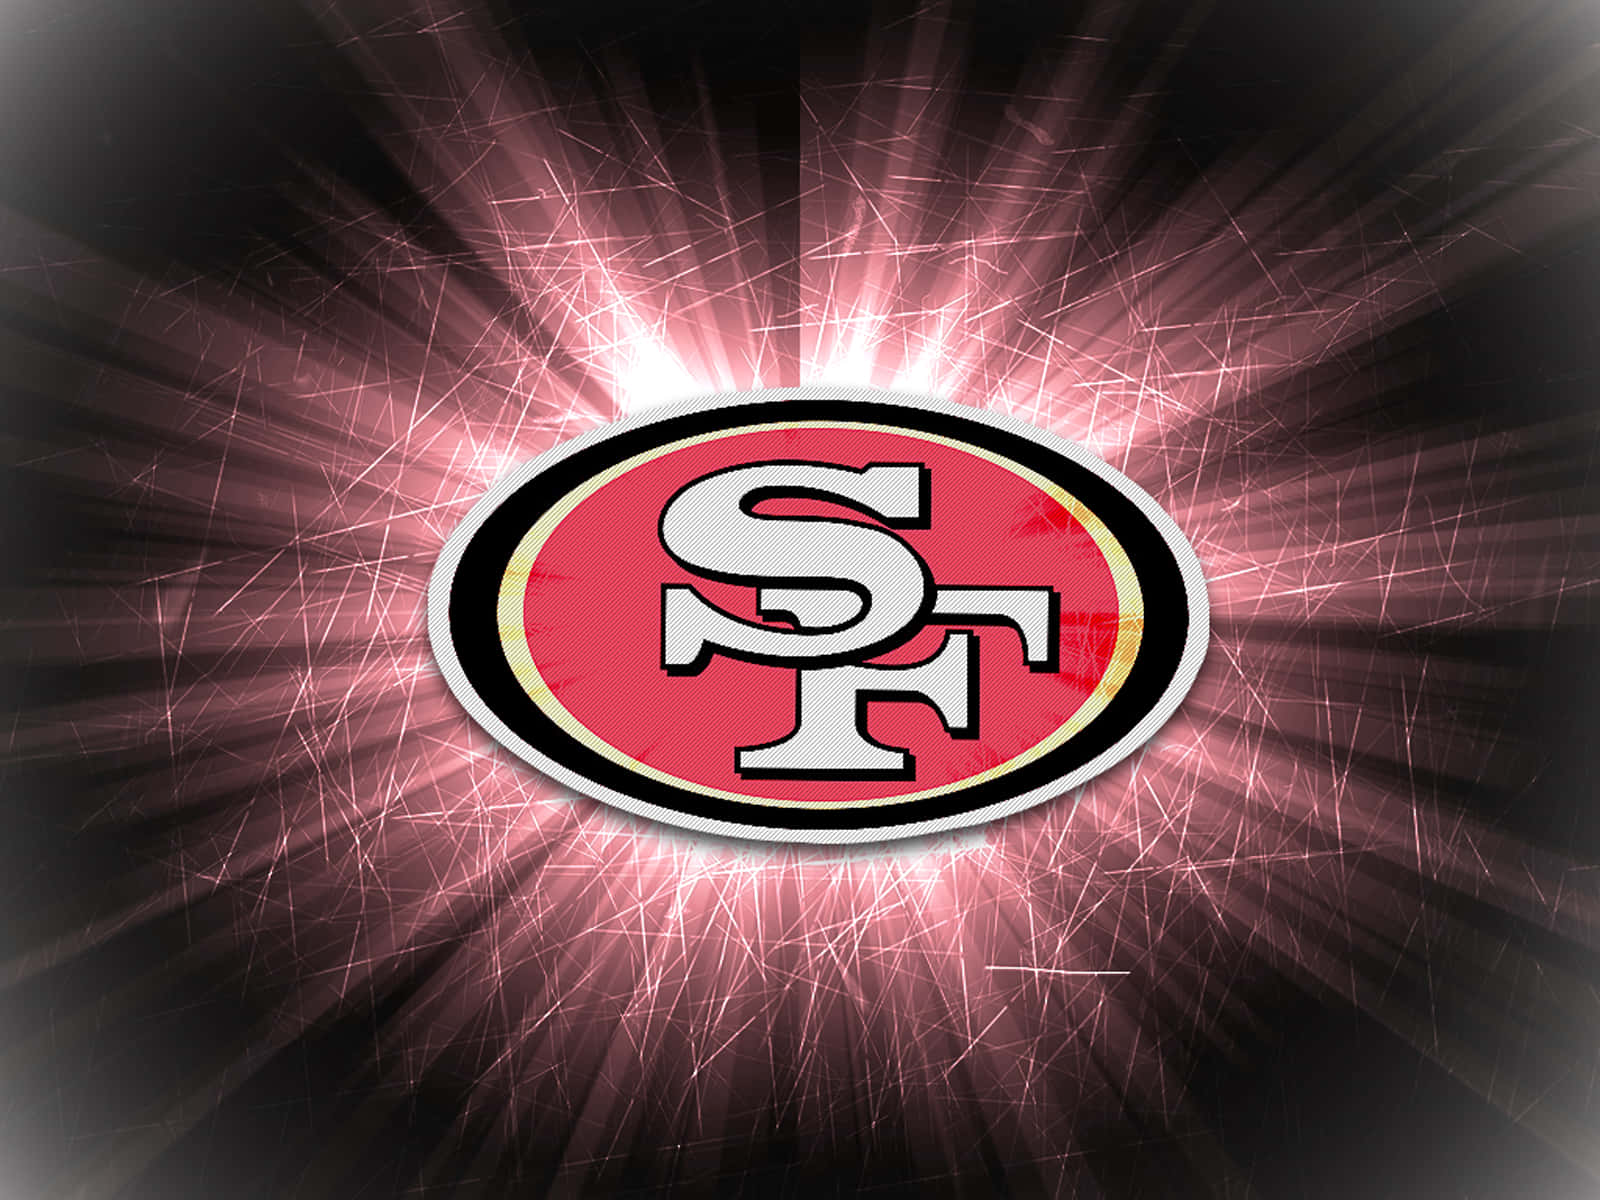 Come forth as a team and conquer - join us in the spirit of the San Francisco 49ers!